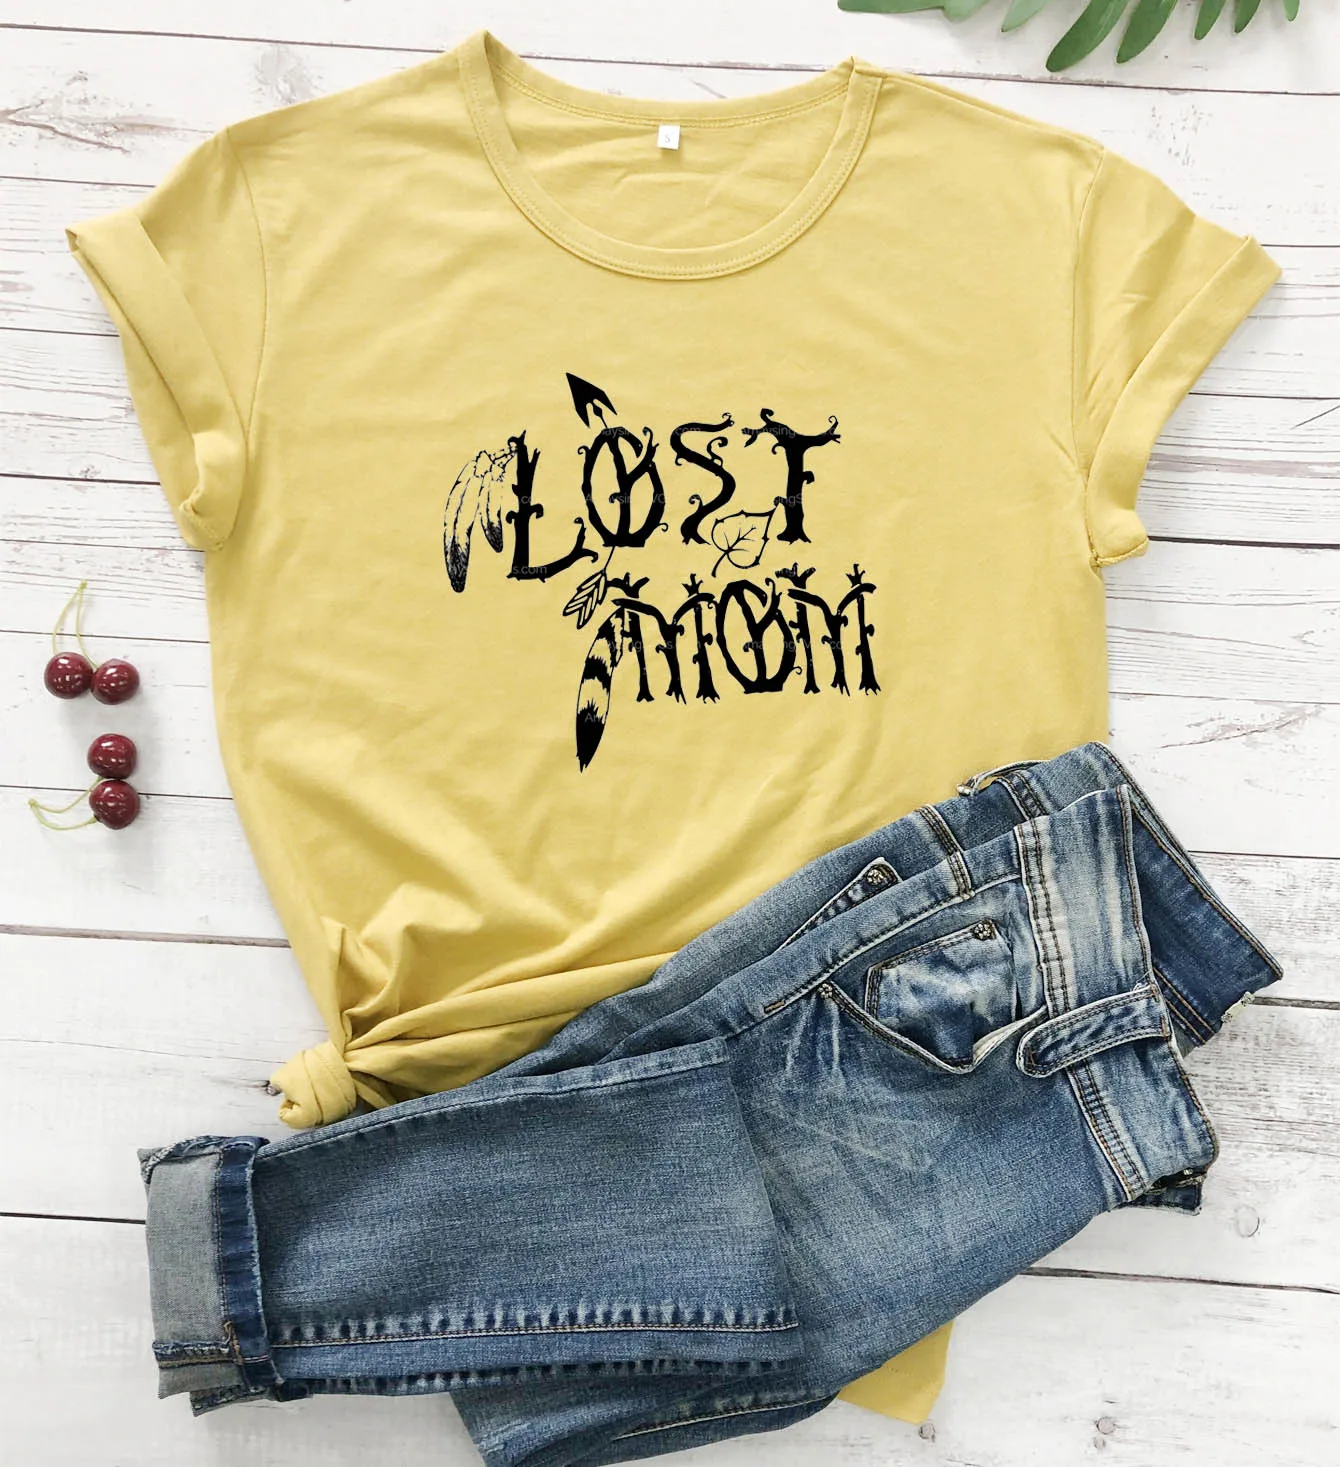 

Lost Mom feather graphic kawaii 100% cotton street style fashion youngs 90s vintage hipster grunge tumblr t shirt young tee tops